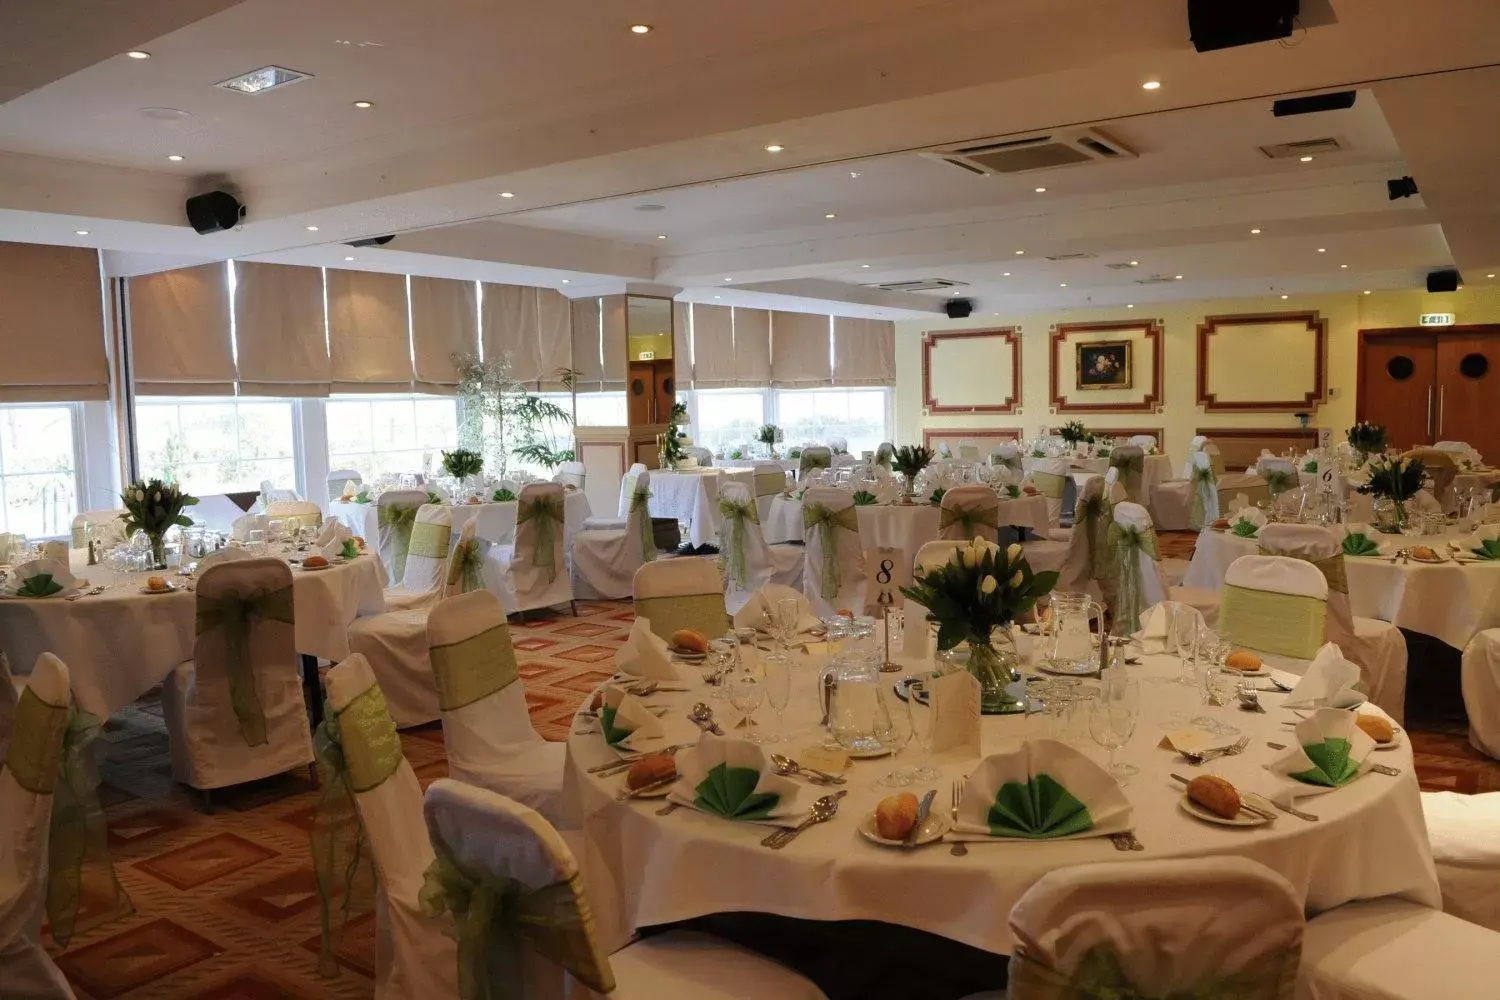 Banquet/Function facilities, Banquet Facilities in Best Western Homestead Court Hotel